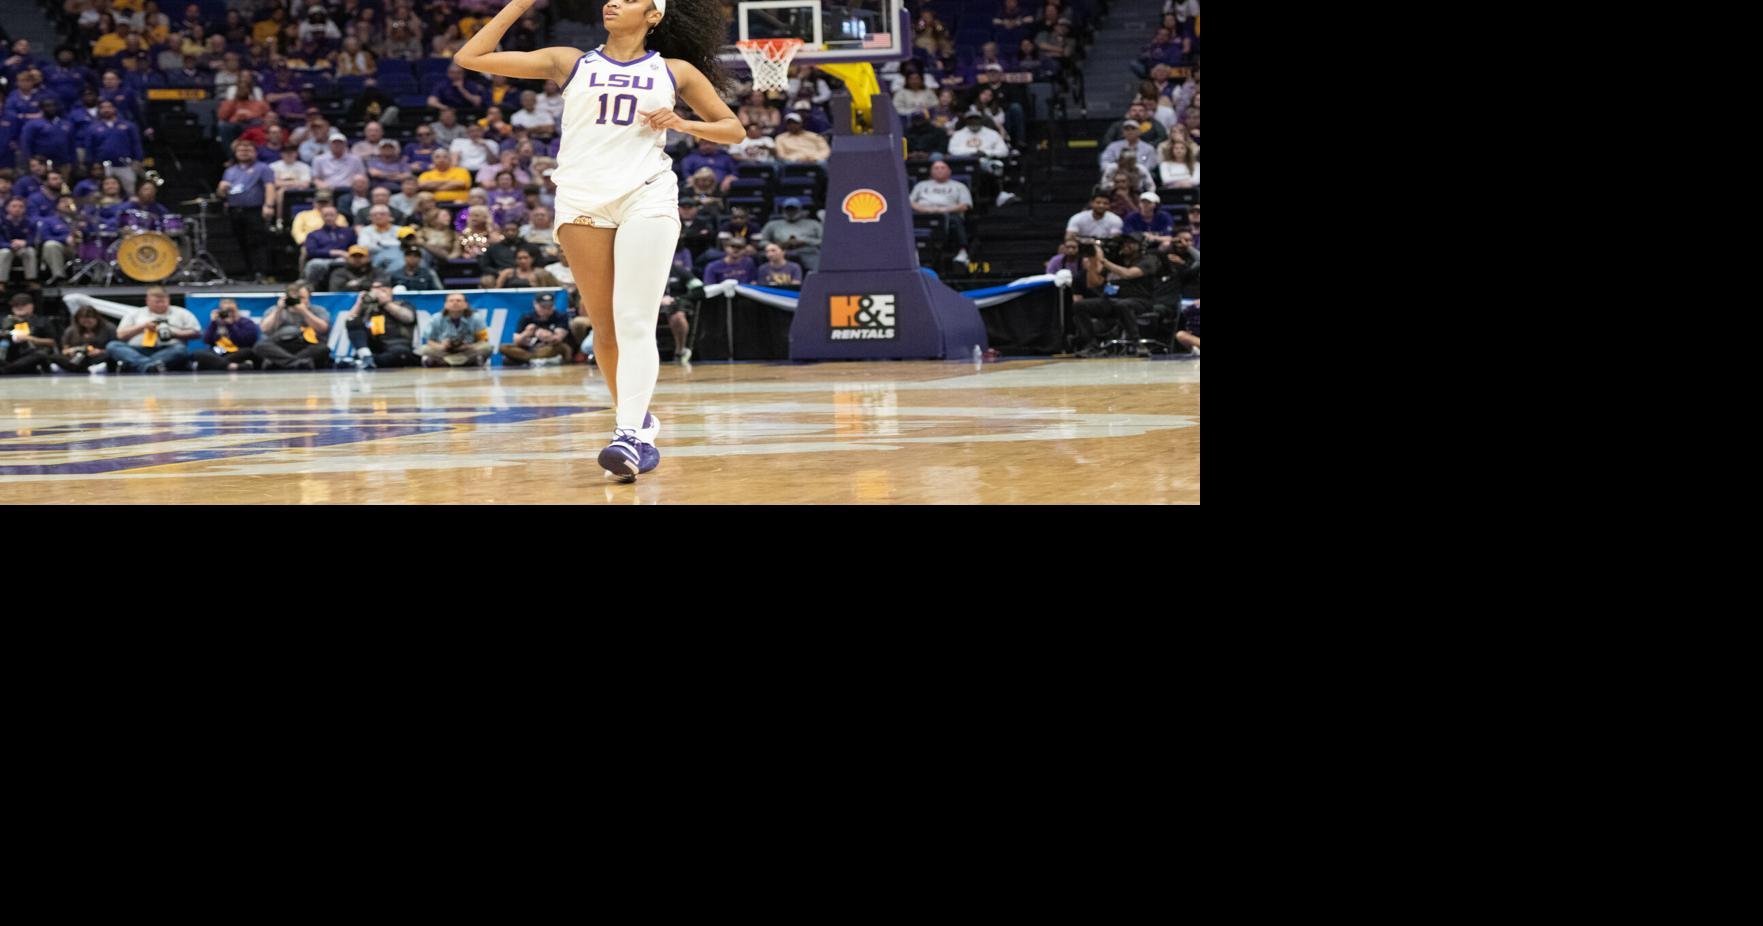 LSU's Angel Reese has declared for the WNBA draft | Sports | lsureveille.com